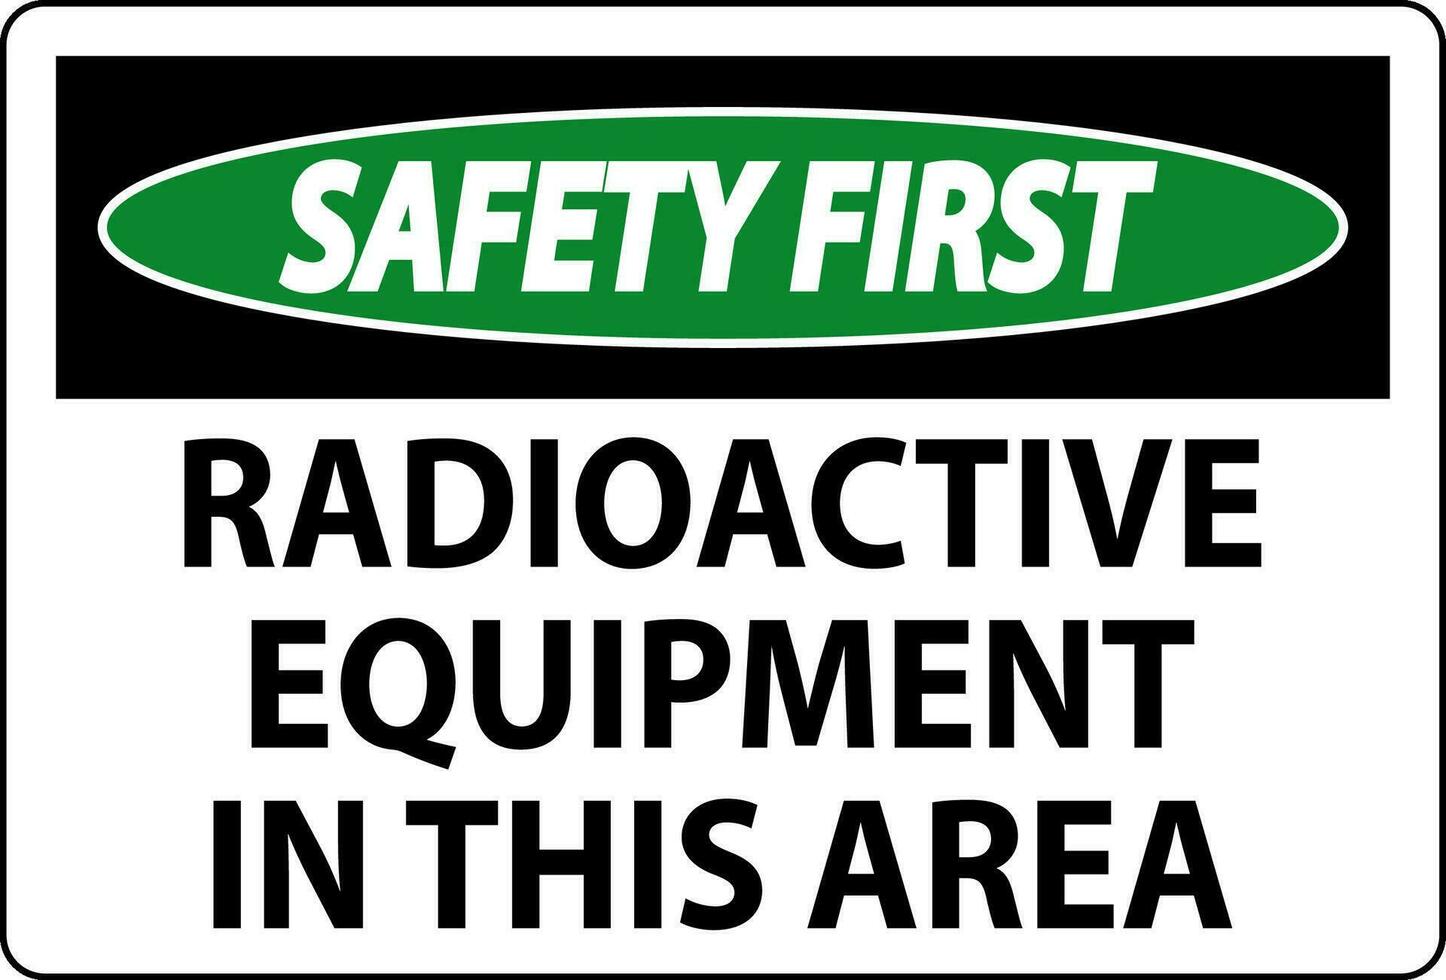 Safety First Sign Caution Radioactive Equipment In This Area vector